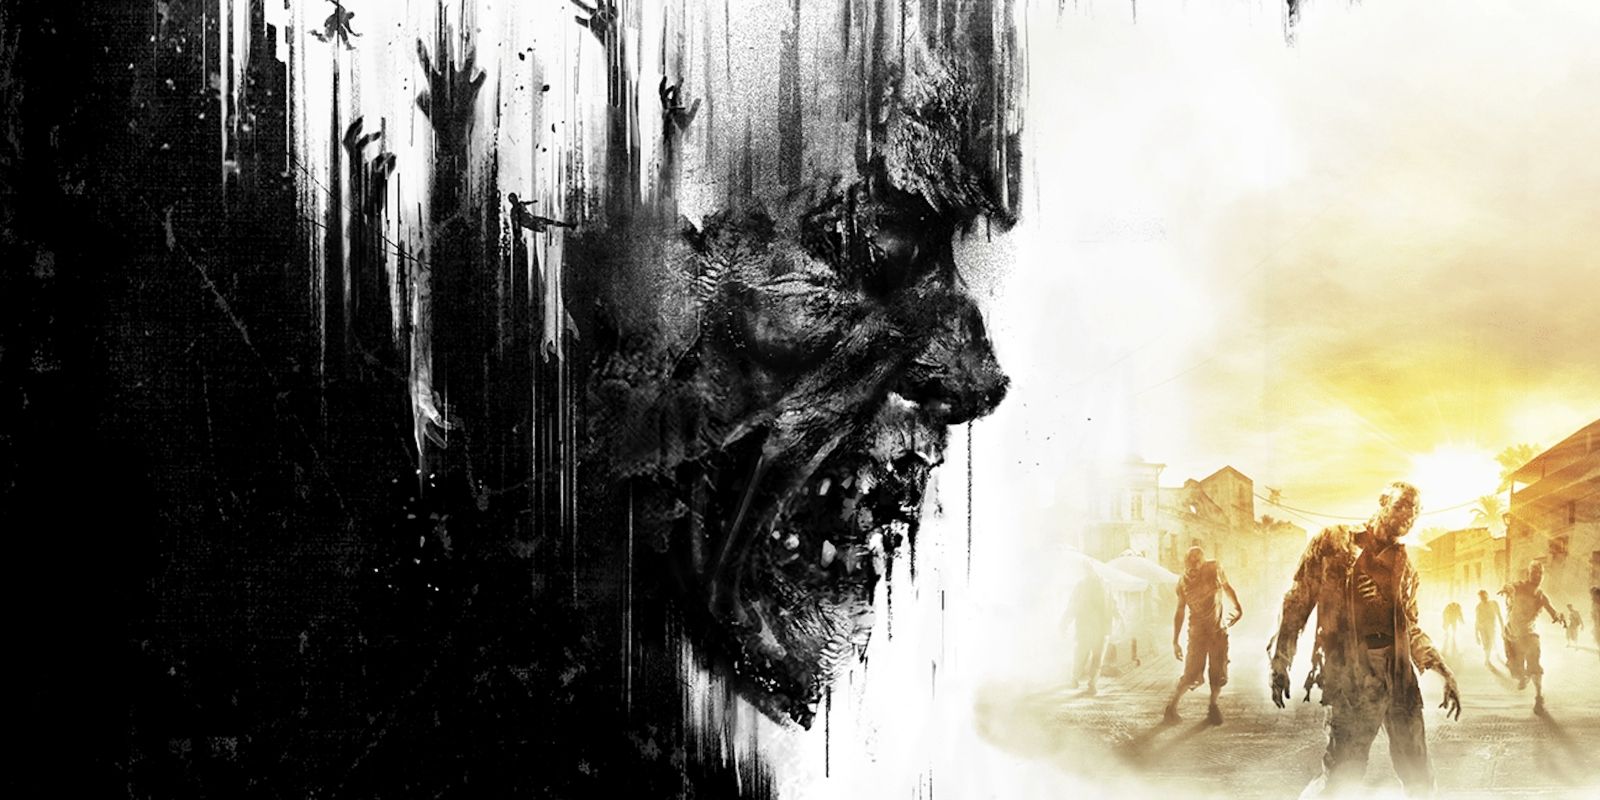 Dying Light Platinum Edition for Nintendo Switch revealed in leak